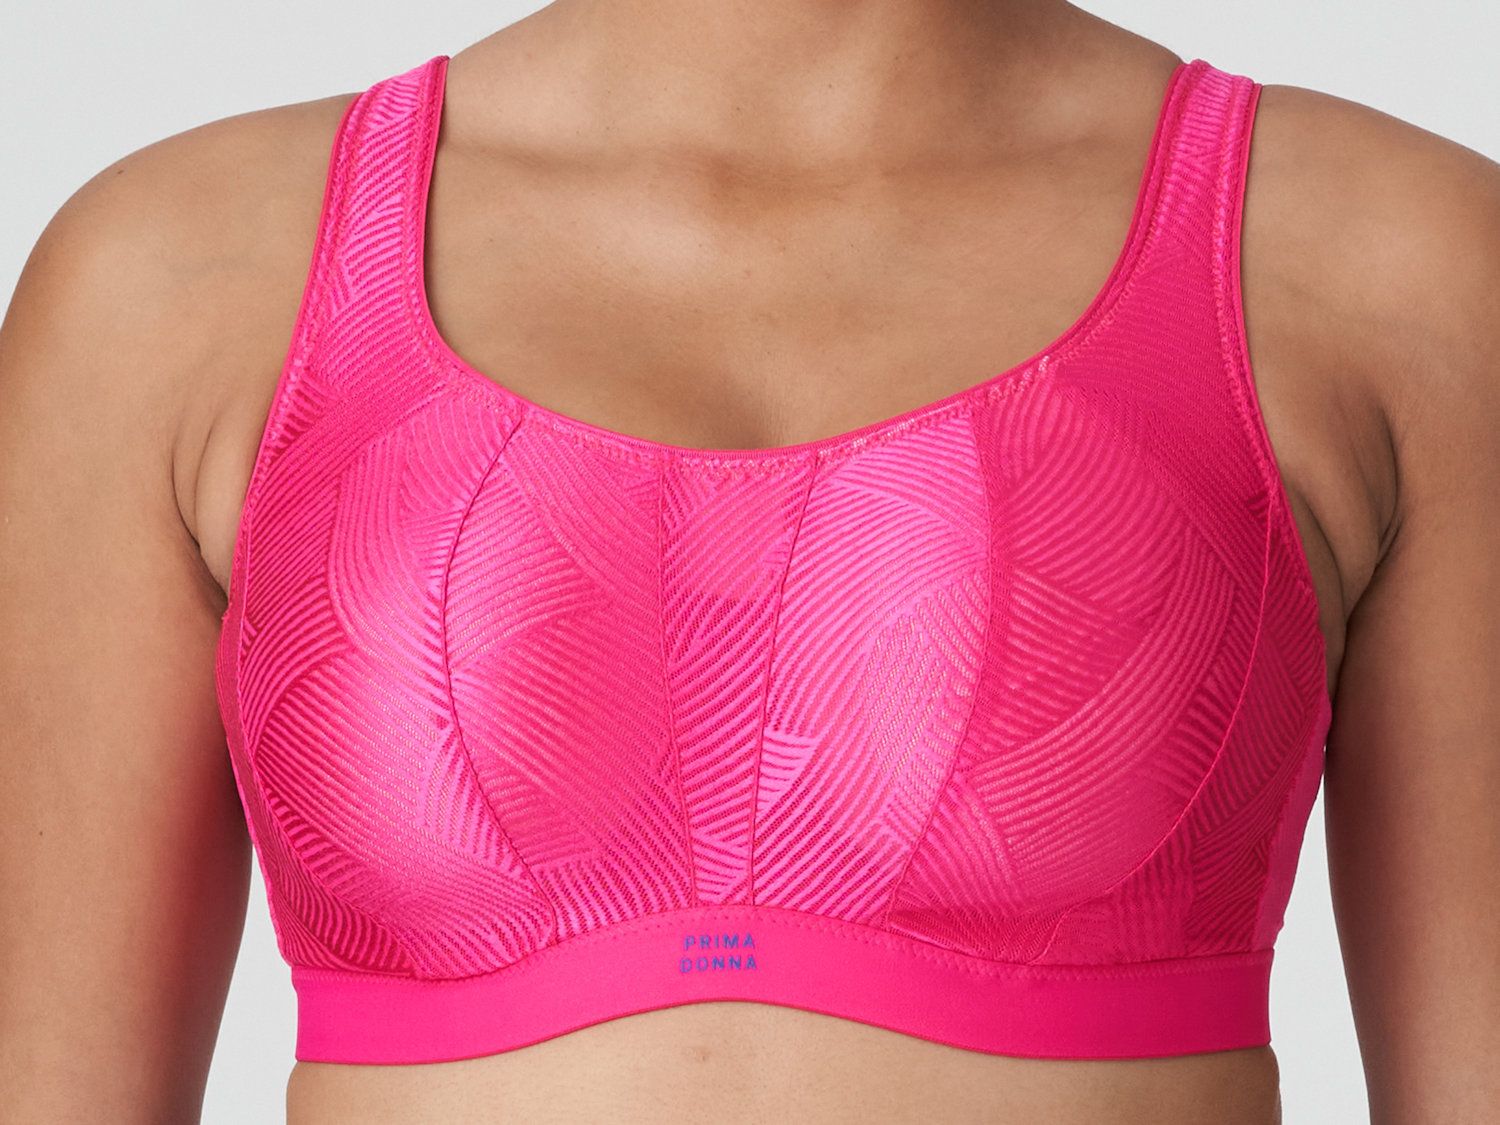 https://www.lumingerie.com/images/products/the-game-6000510-uw-sports-bra-electric-pink-f_orig.jpg